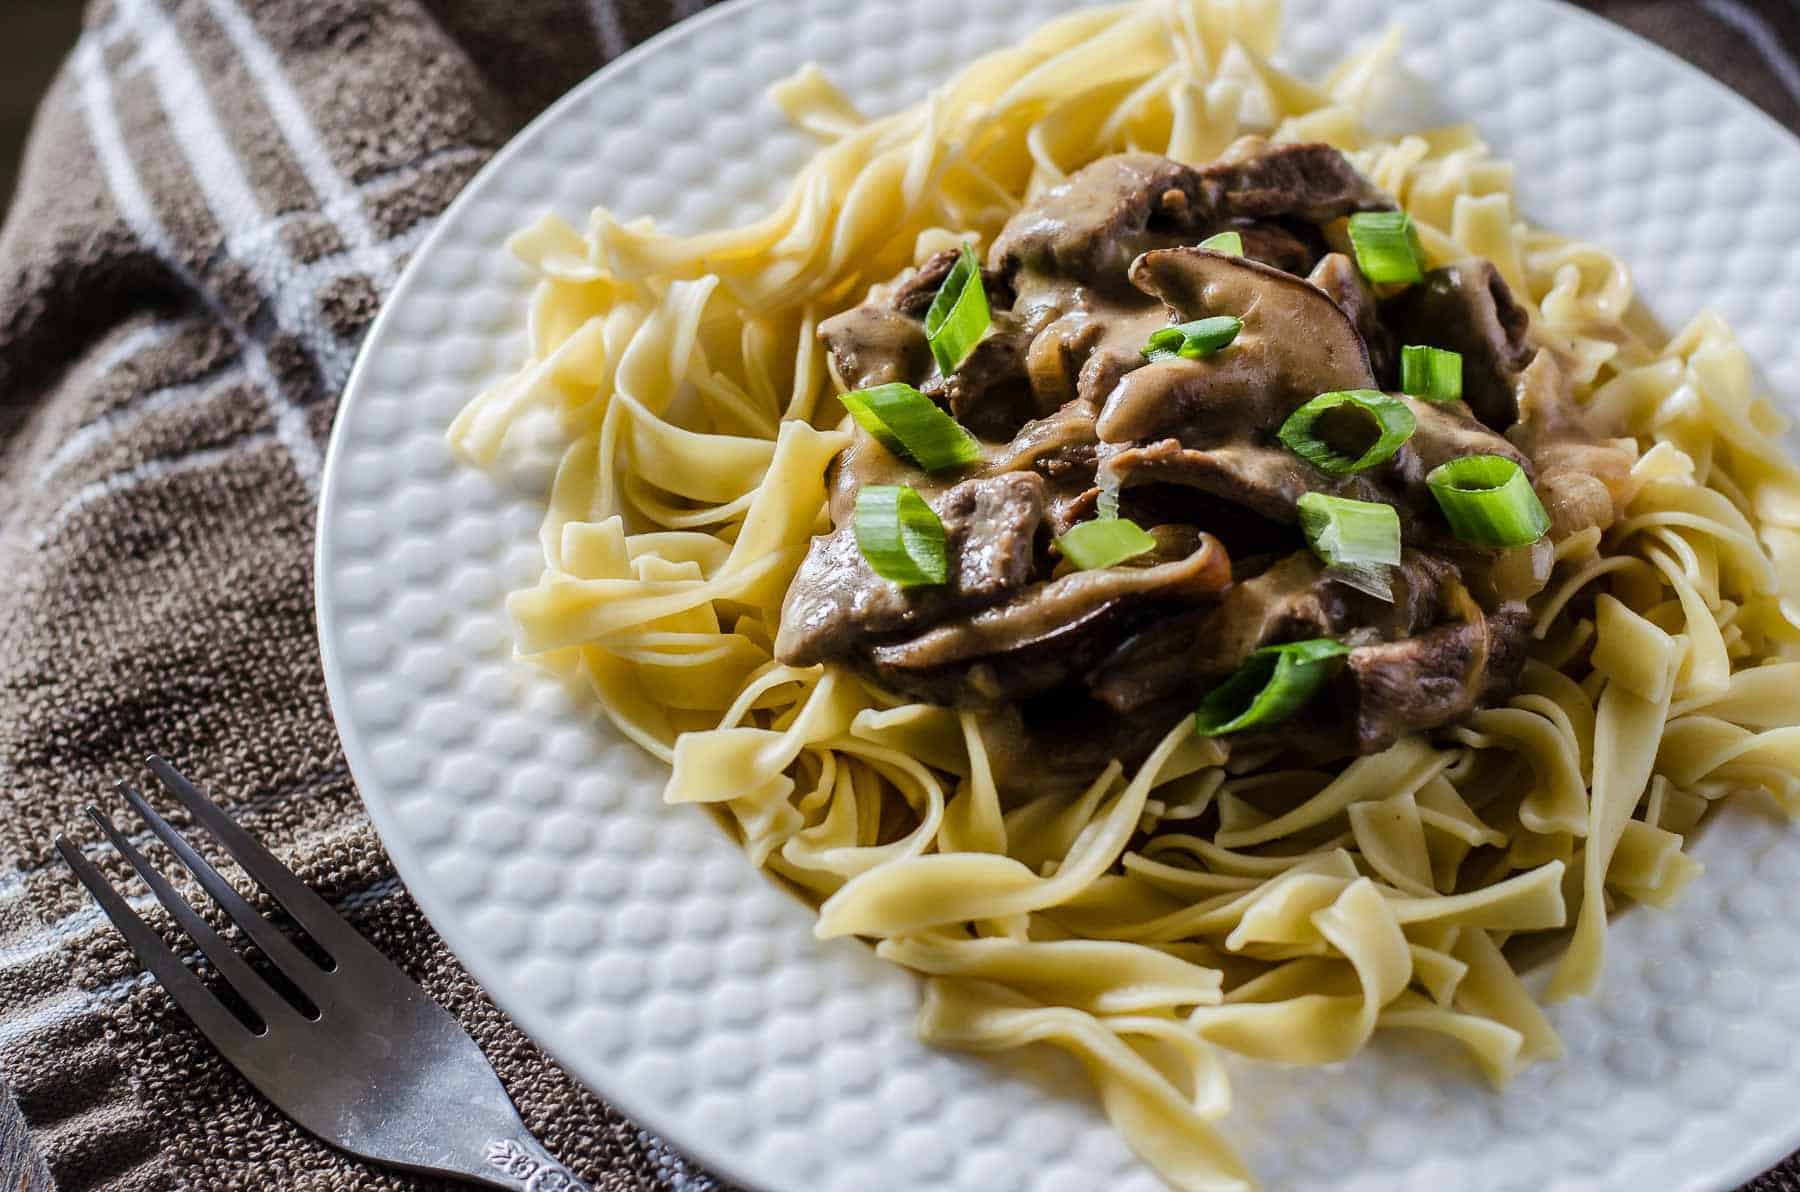 This classic Beef Stroganoff recipe comes together in less than 30 minutes! Choose your favorite cut of steak and cook it in an amazing creamy mushroom sauce, then serve it all over egg noodles for a fabulous hot lunch or dinner.